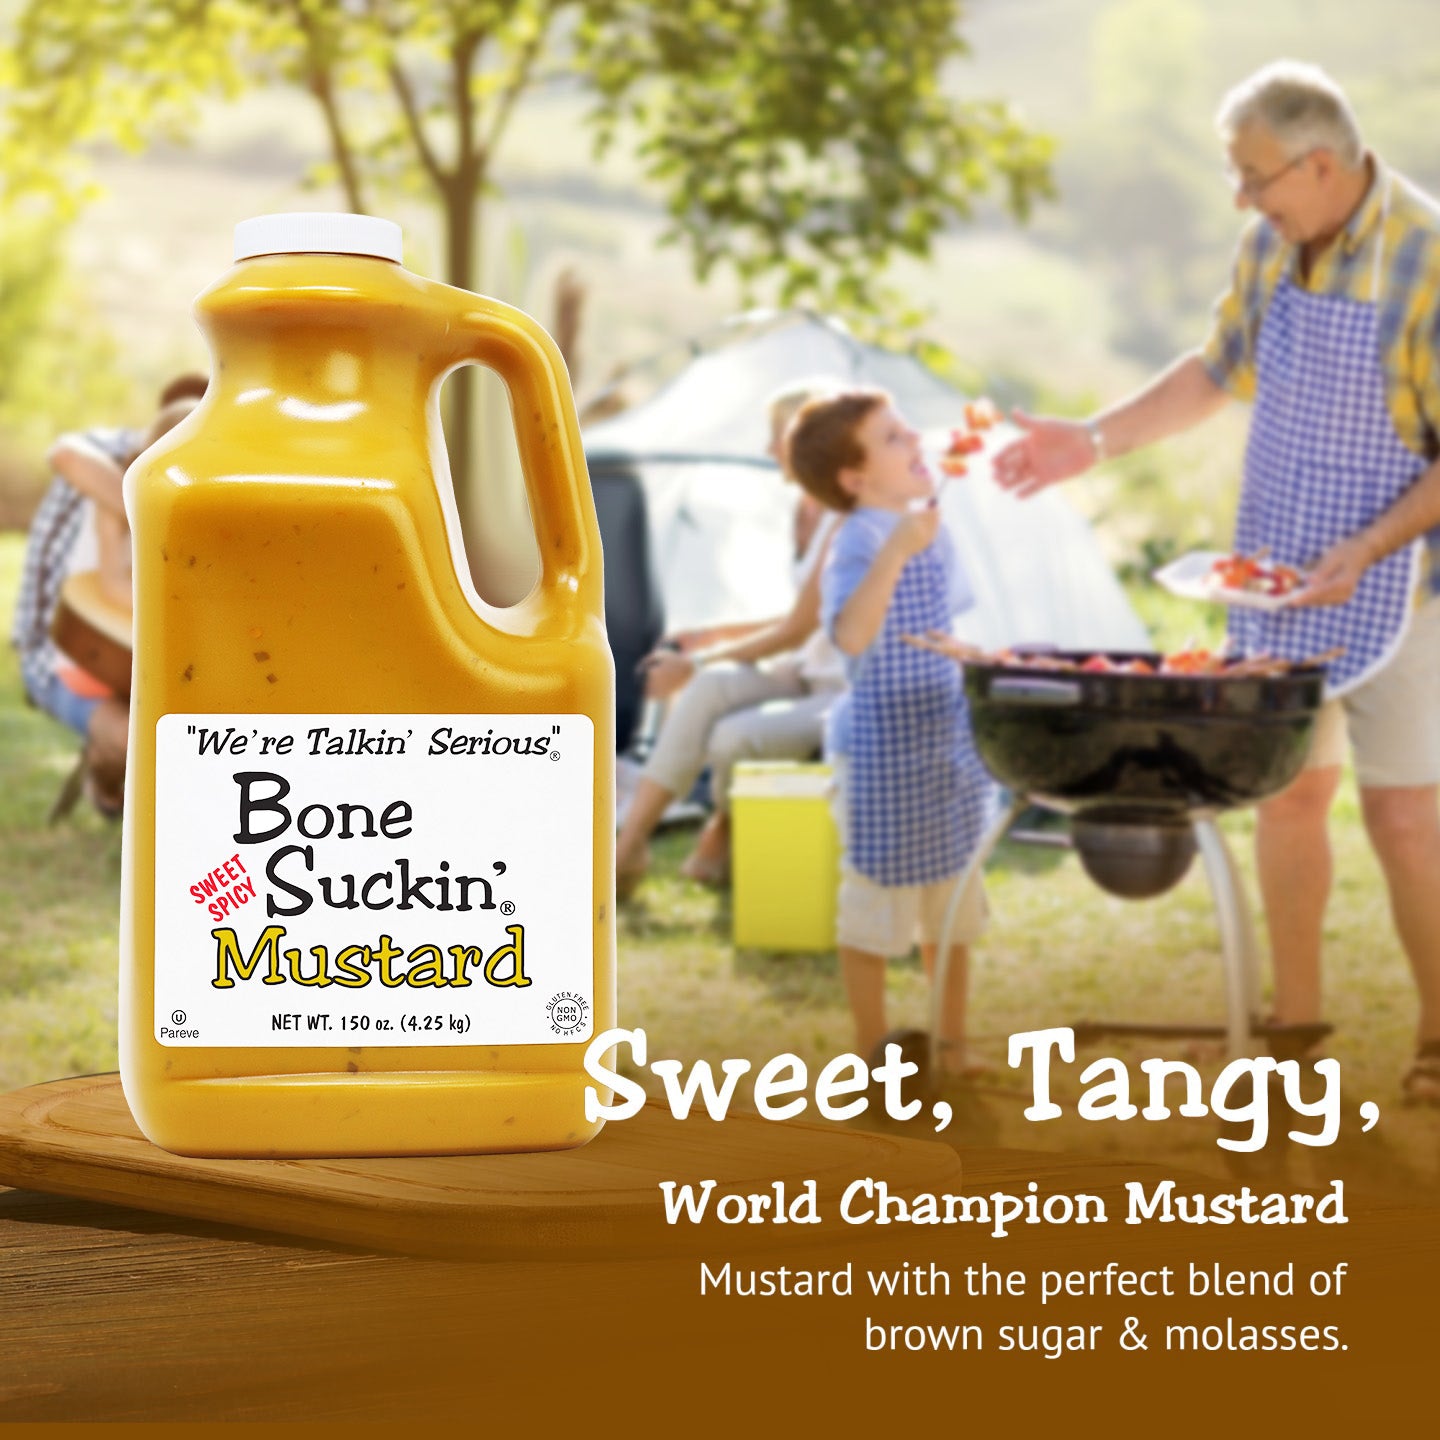 Bone Suckin' Sweet Spicy Mustard, 150 oz - Gourmet Jalapeno Mustard, Sweet Spicy, Creamy & Tangy, Gluten-Free, Non-GMO, Kosher, Perfect for Hot Dogs, Brats, Sandwiches, Cheese, Seafood.